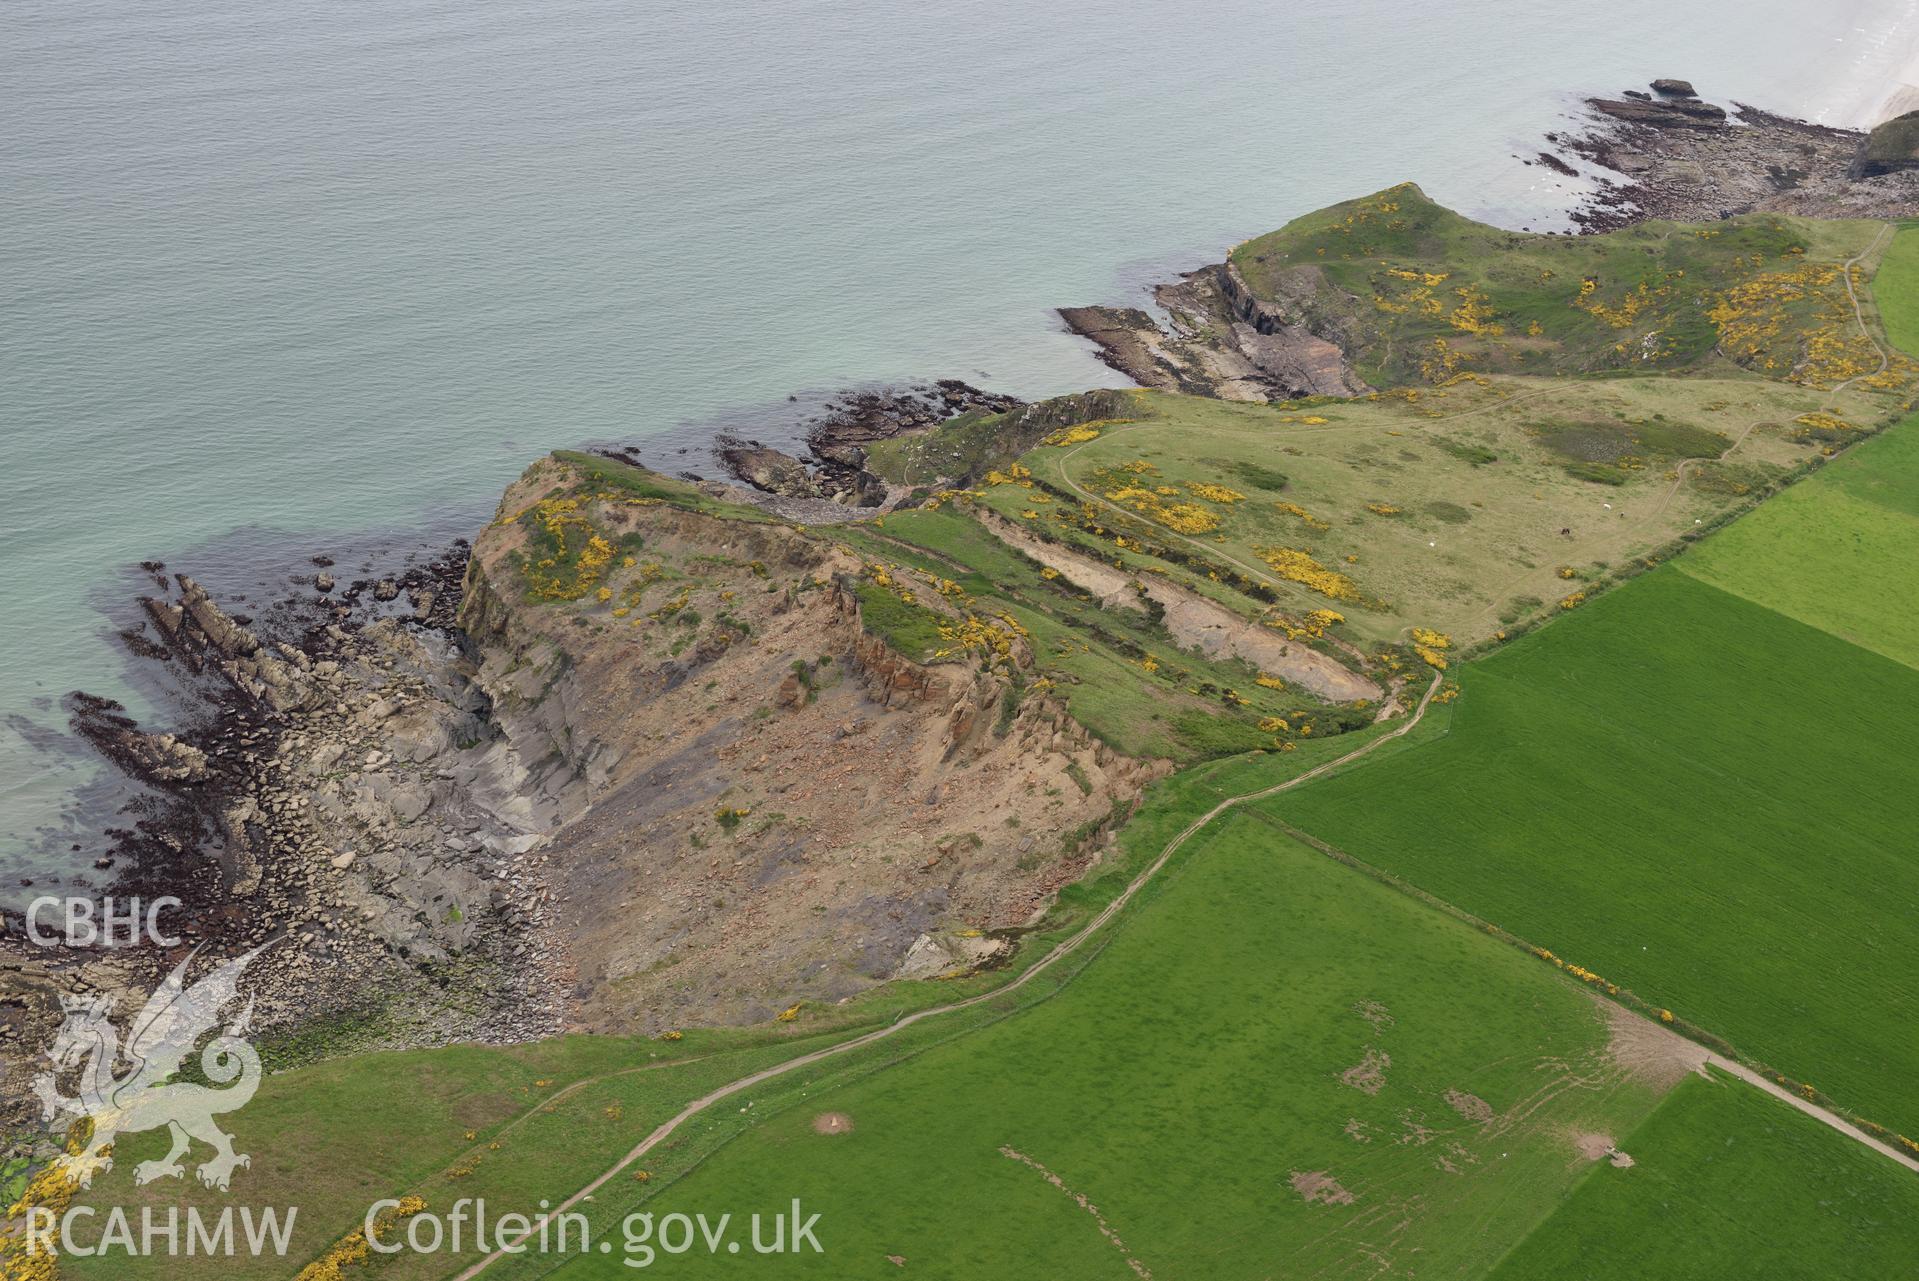 Black Point Rath coastal promontory fort. Baseline aerial reconnaissance survey for the CHERISH Project. ? Crown: CHERISH PROJECT 2017. Produced with EU funds through the Ireland Wales Co-operation Programme 2014-2020. All material made freely available through the Open Government Licence.